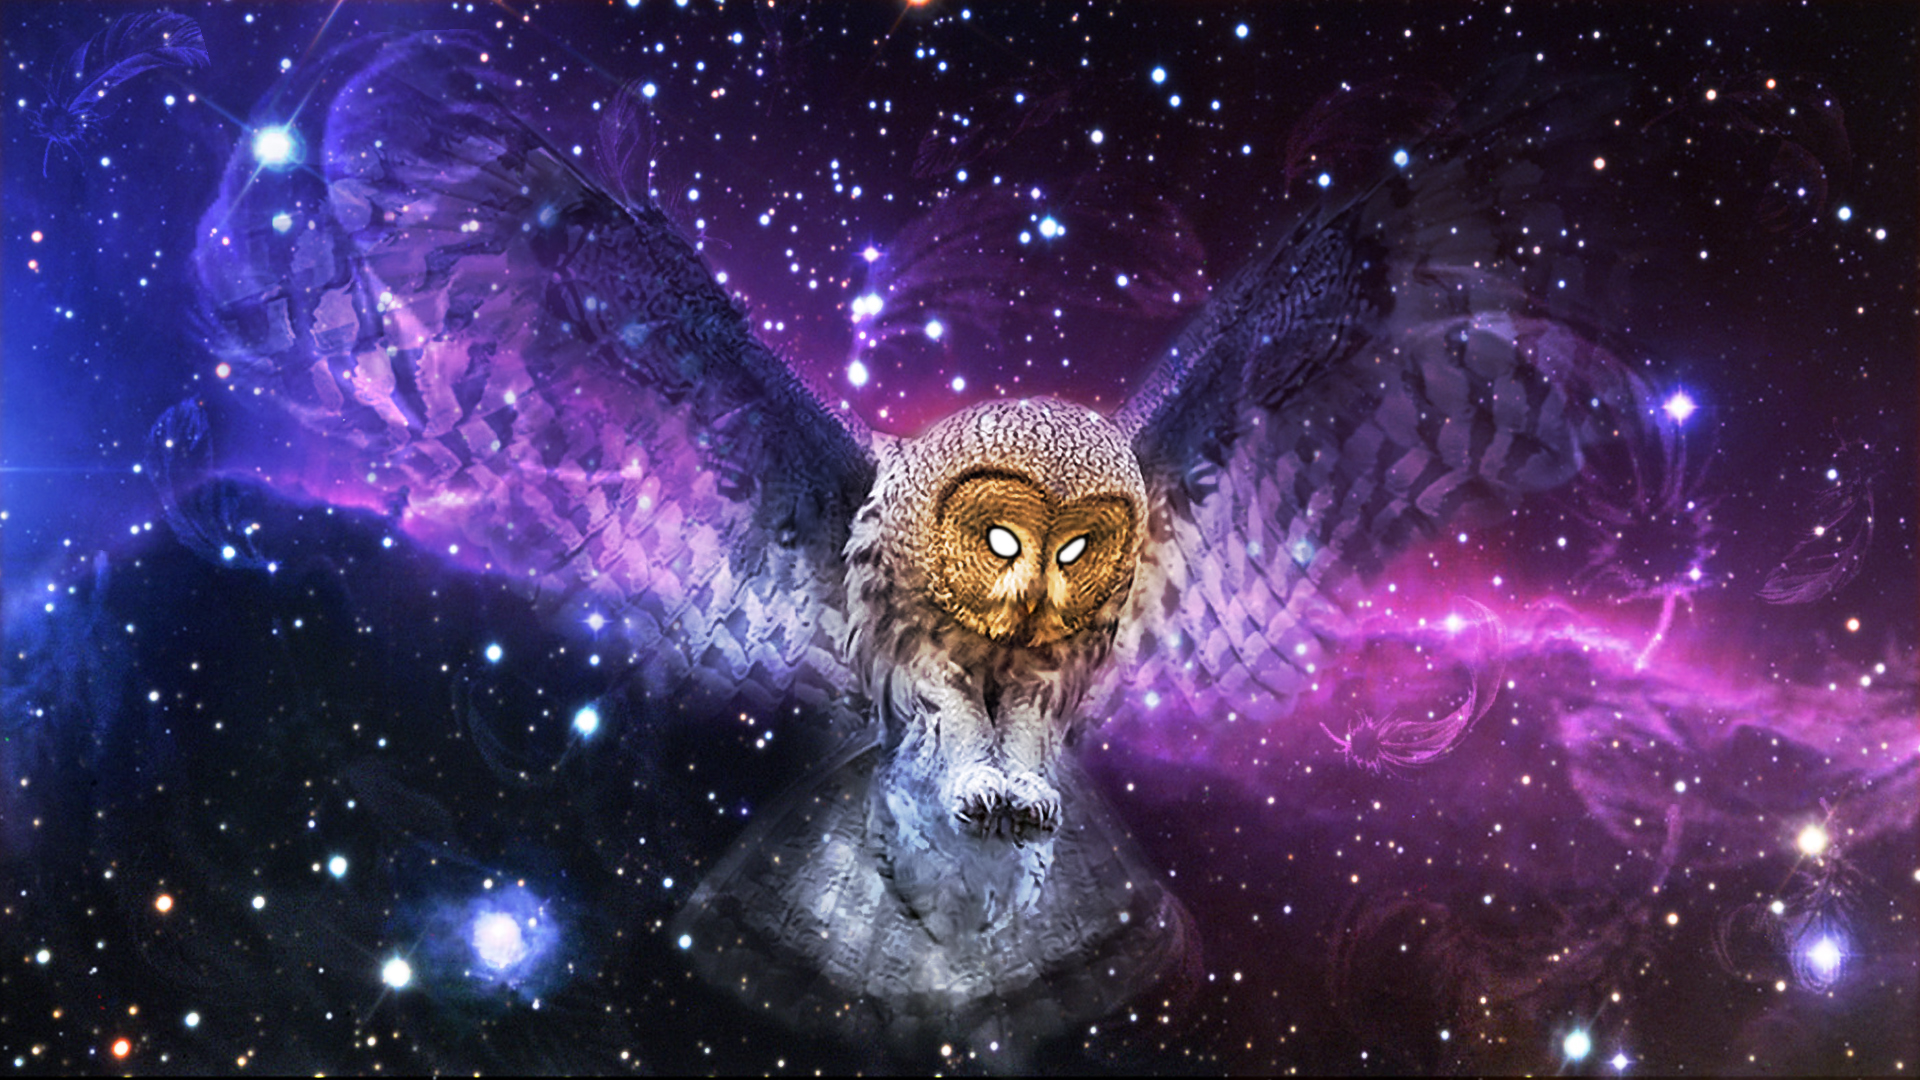 Purple Owl Wallpapers / Purple, red, and teal owl painting, owl, digital ar...